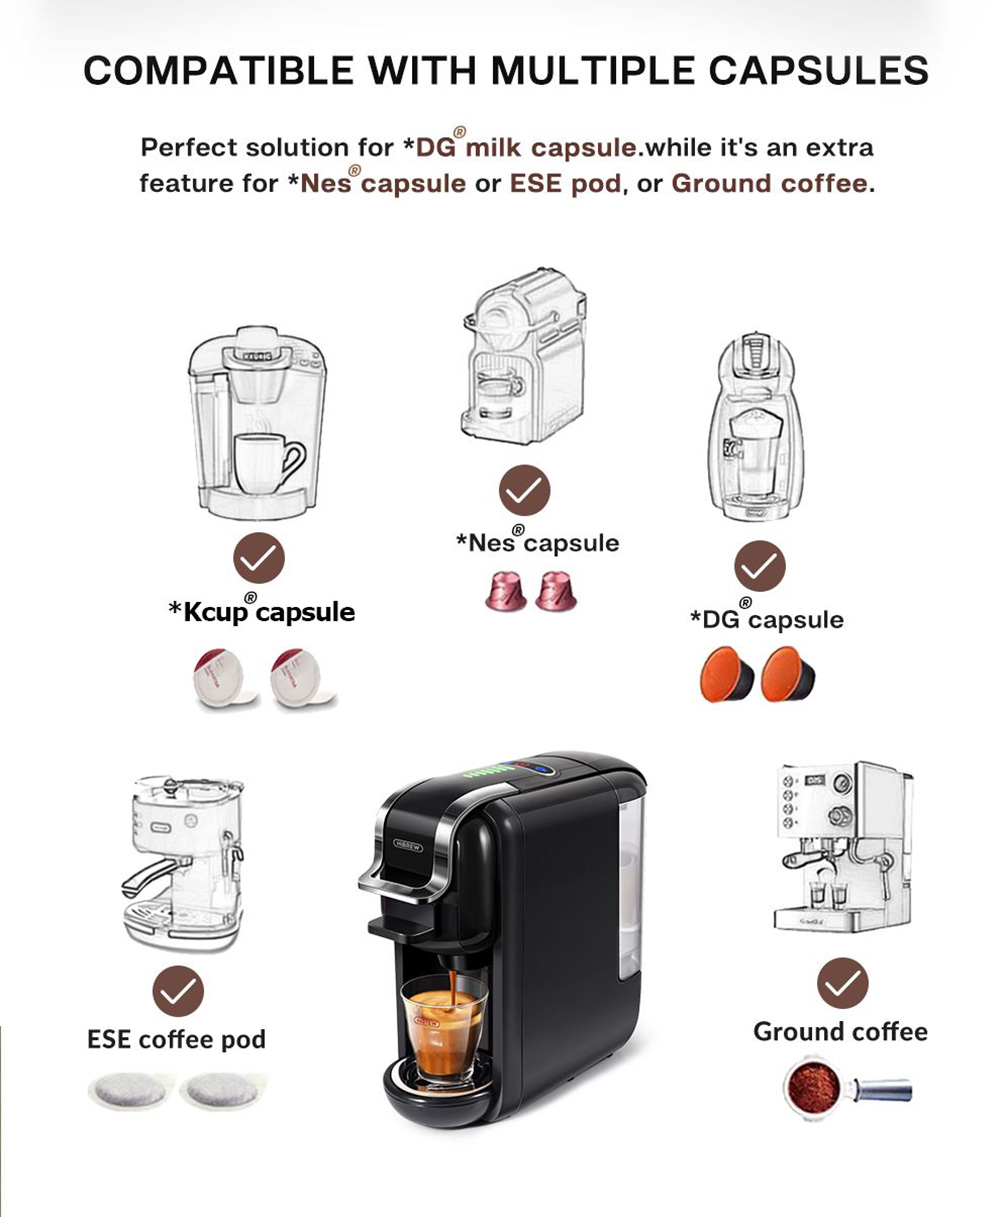 HiBREW H2B 5-in-1 Coffee Maker with Water Level Line, 1450W 19Bar Hot/Cold Capsule Coffee Machine, 600ml Water Tank - Black